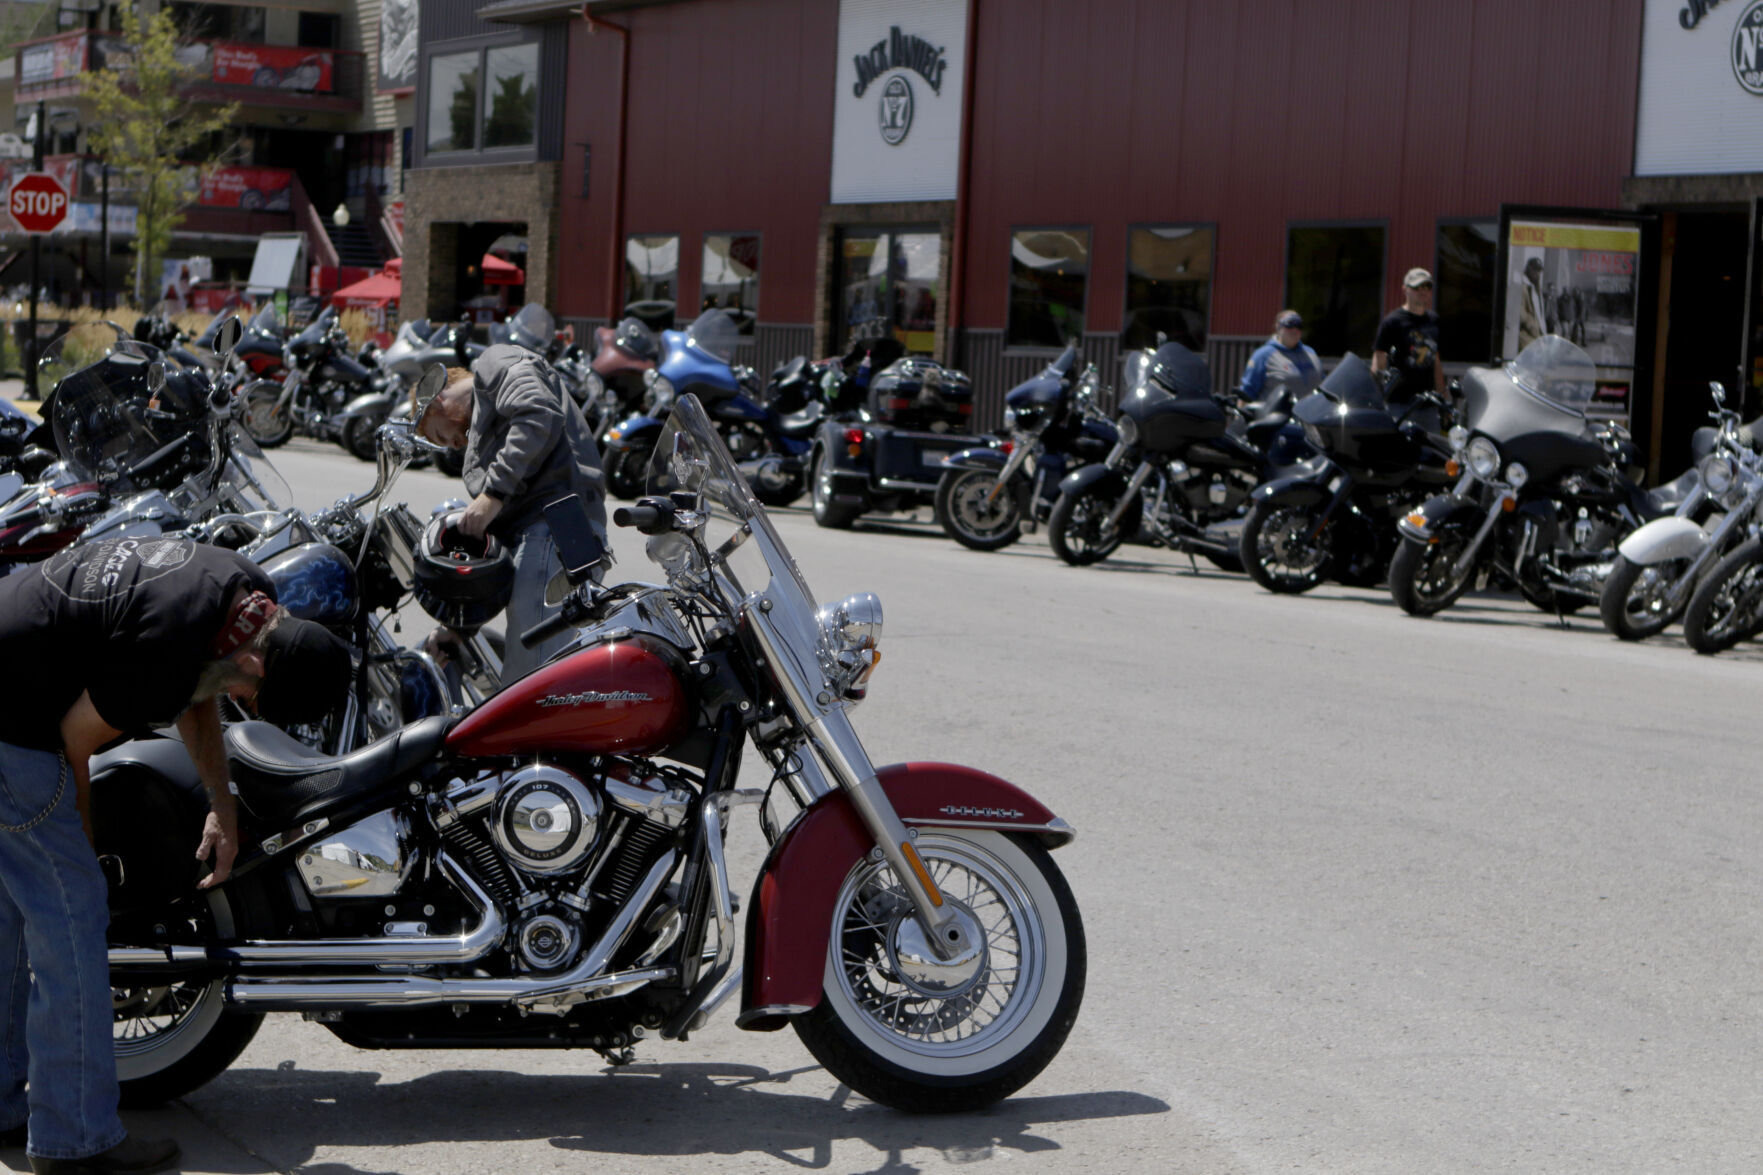 WEB CAMS Live views of the 82nd Annual Sturgis Motorcycle Rally